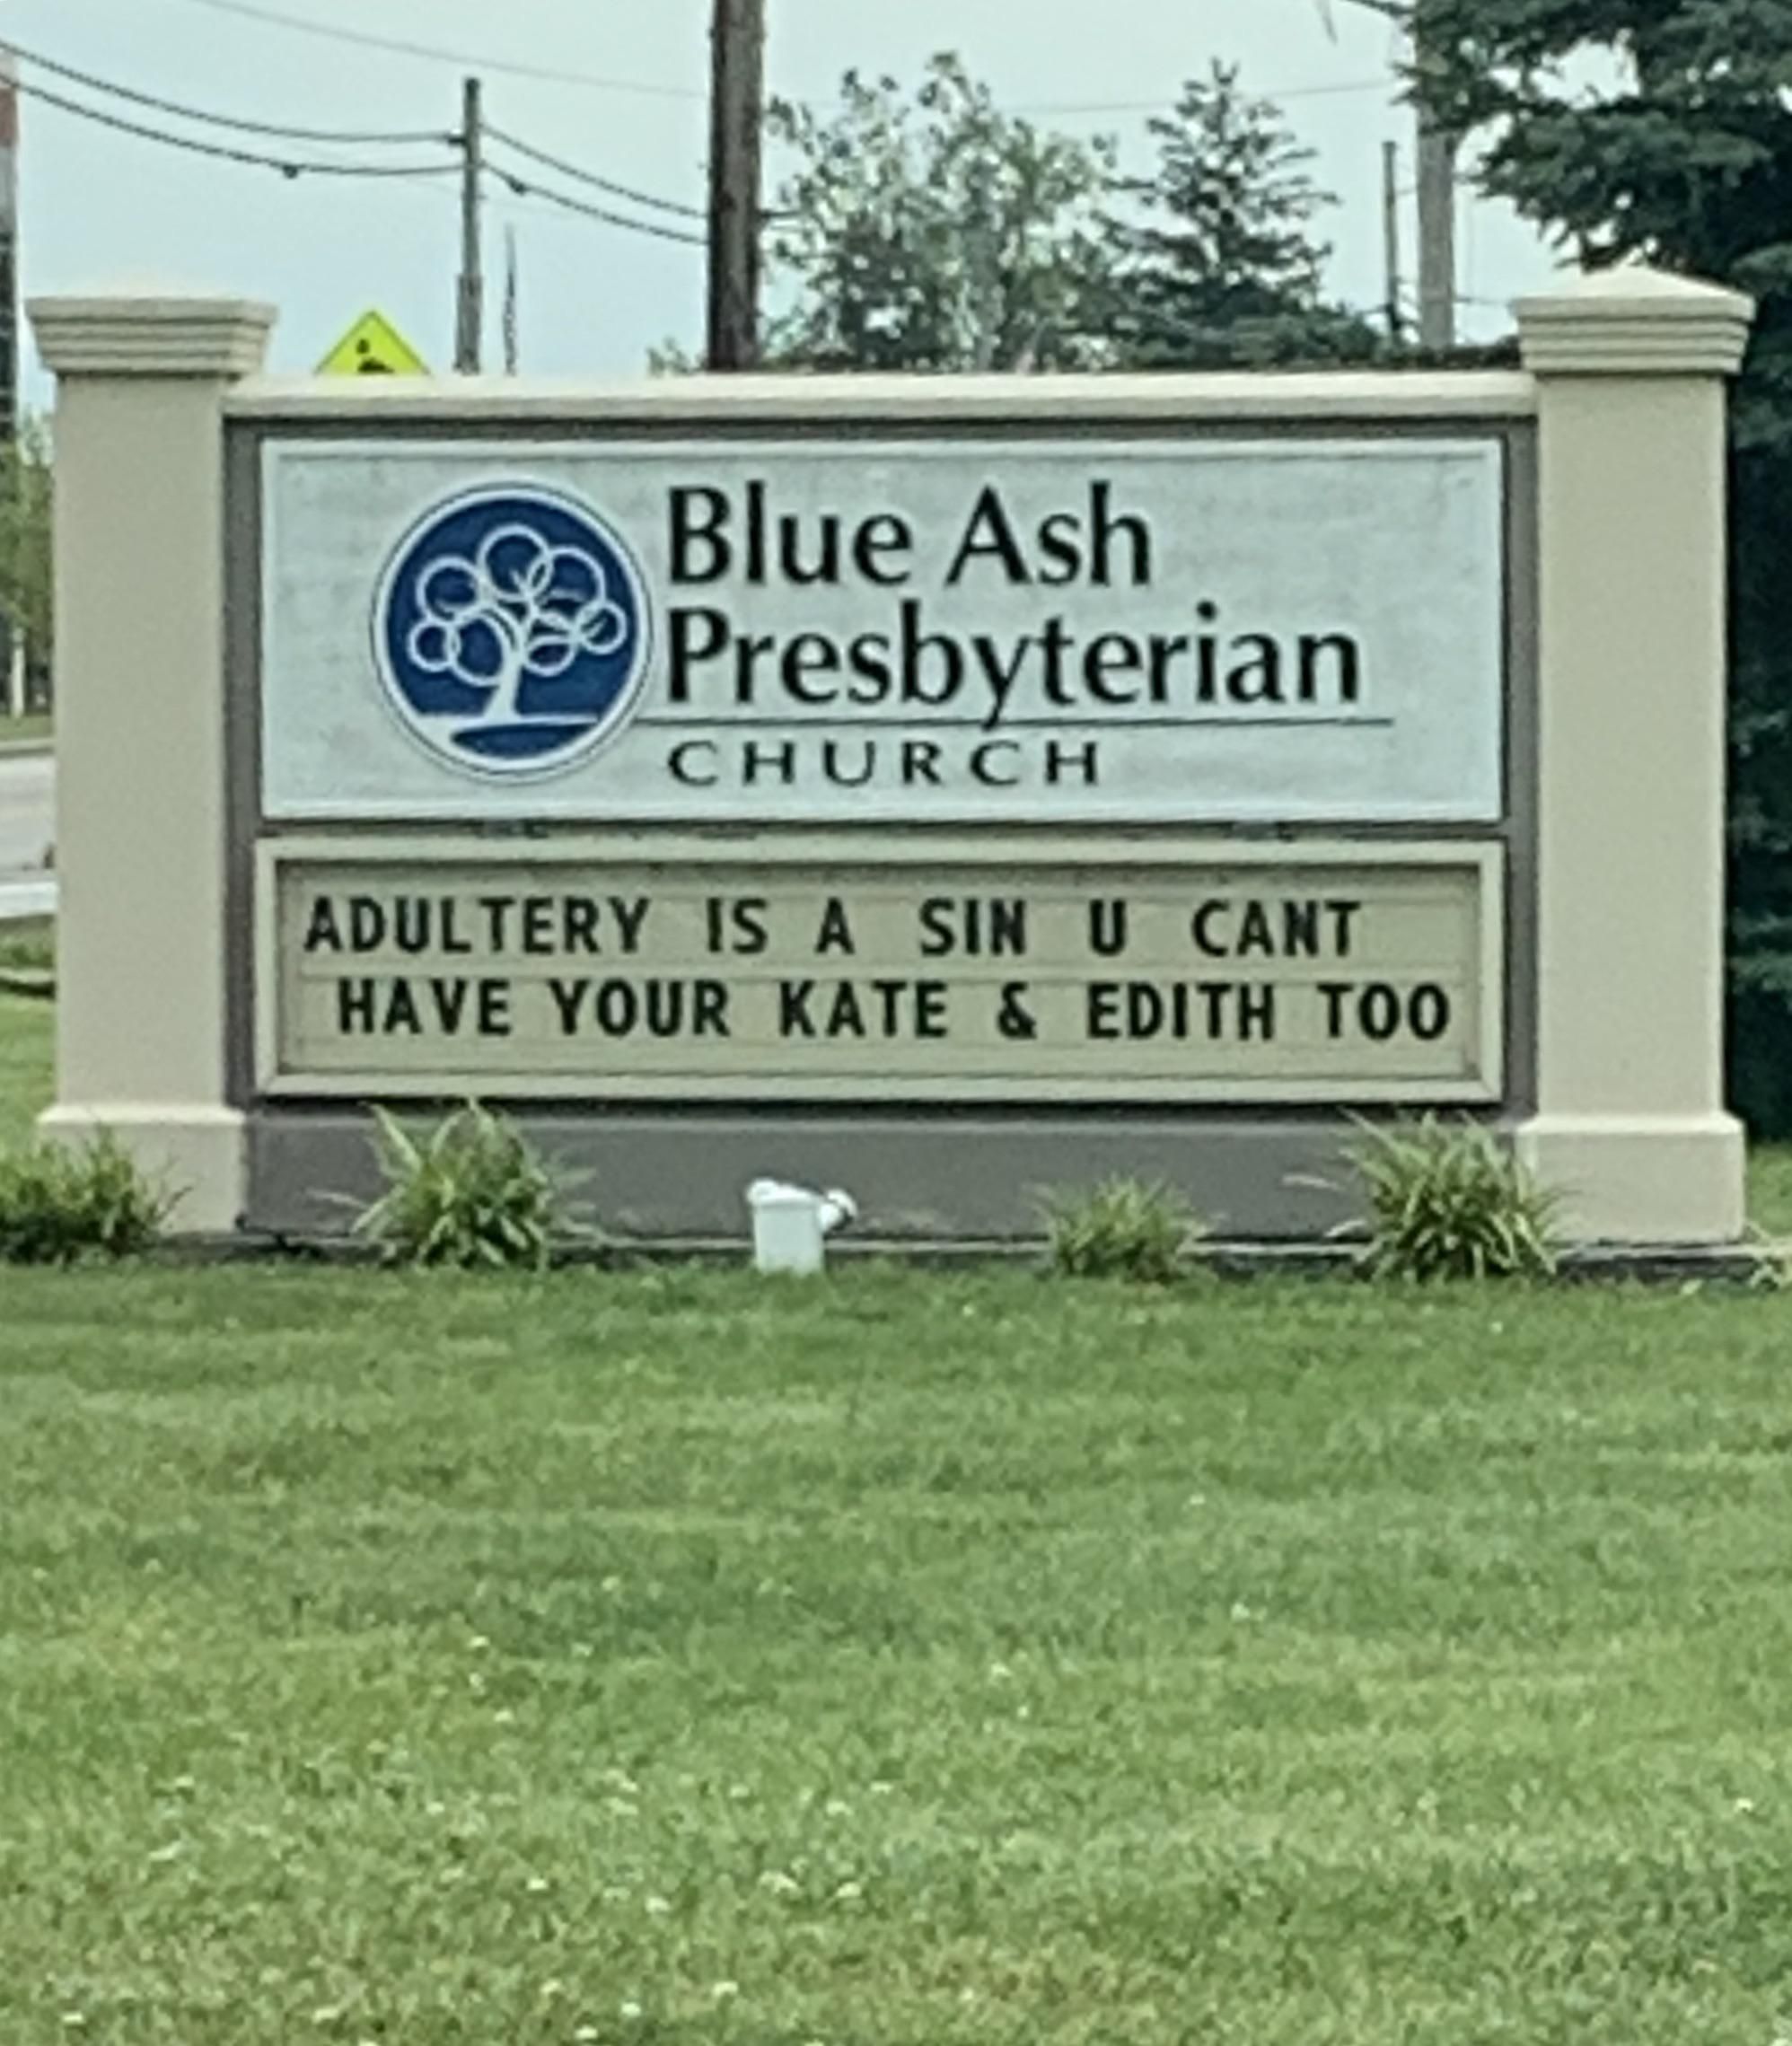 This church sign is going hard on the puns